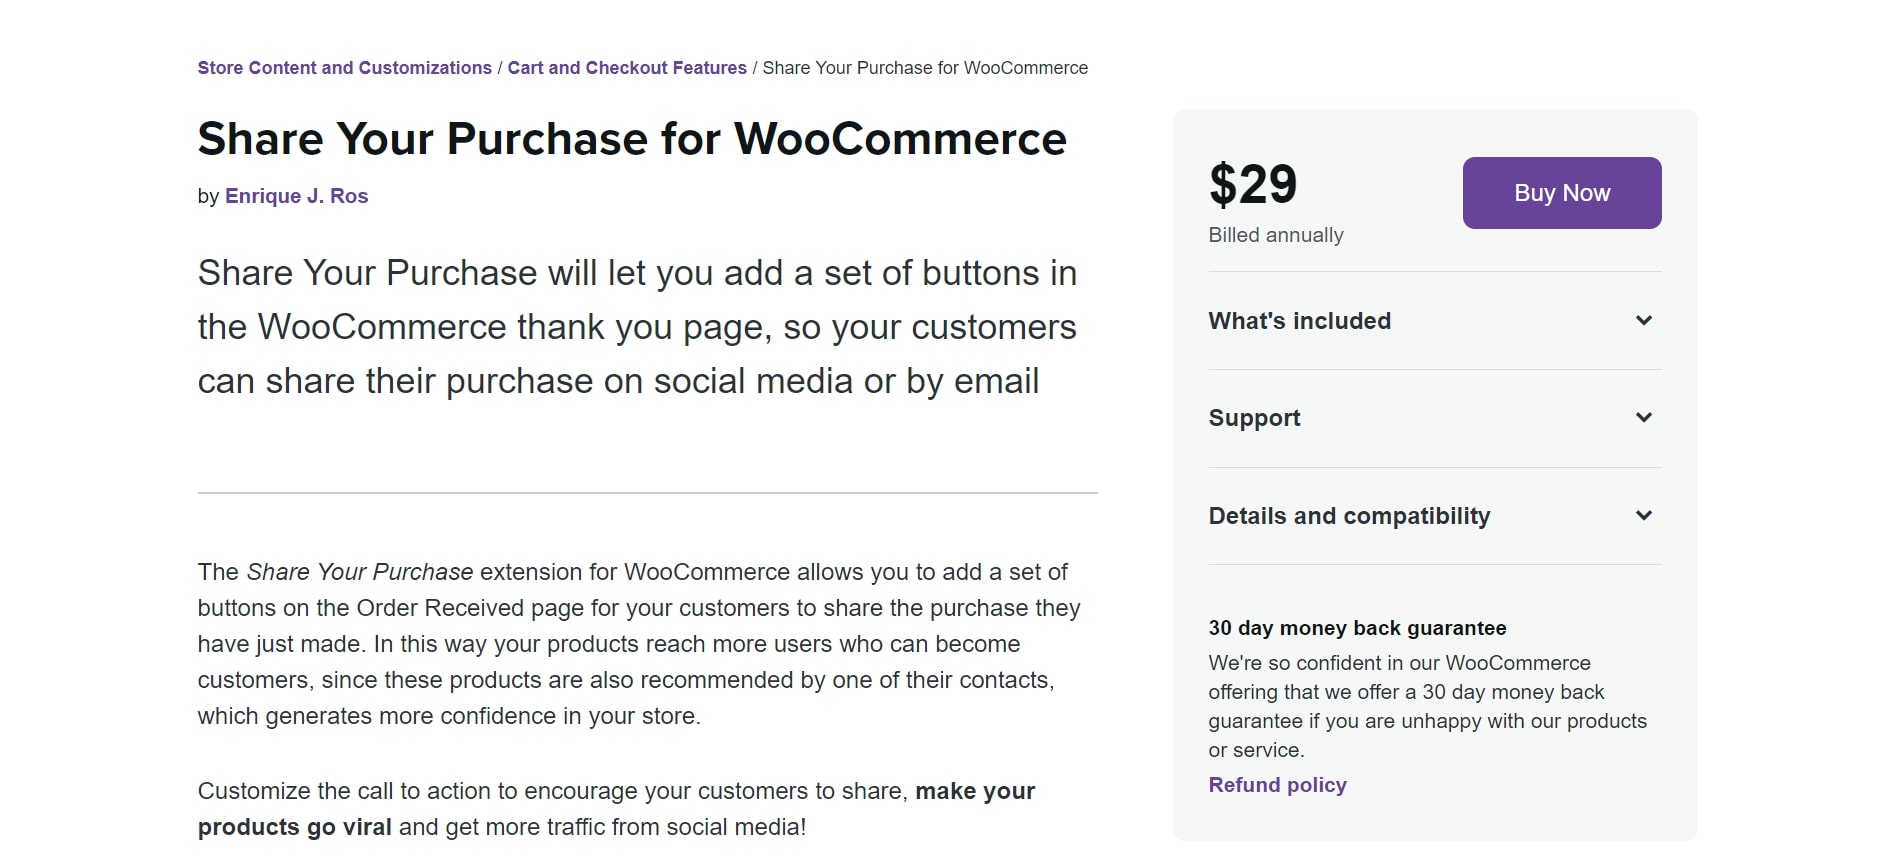 Share Your Purchase for WooCommerce